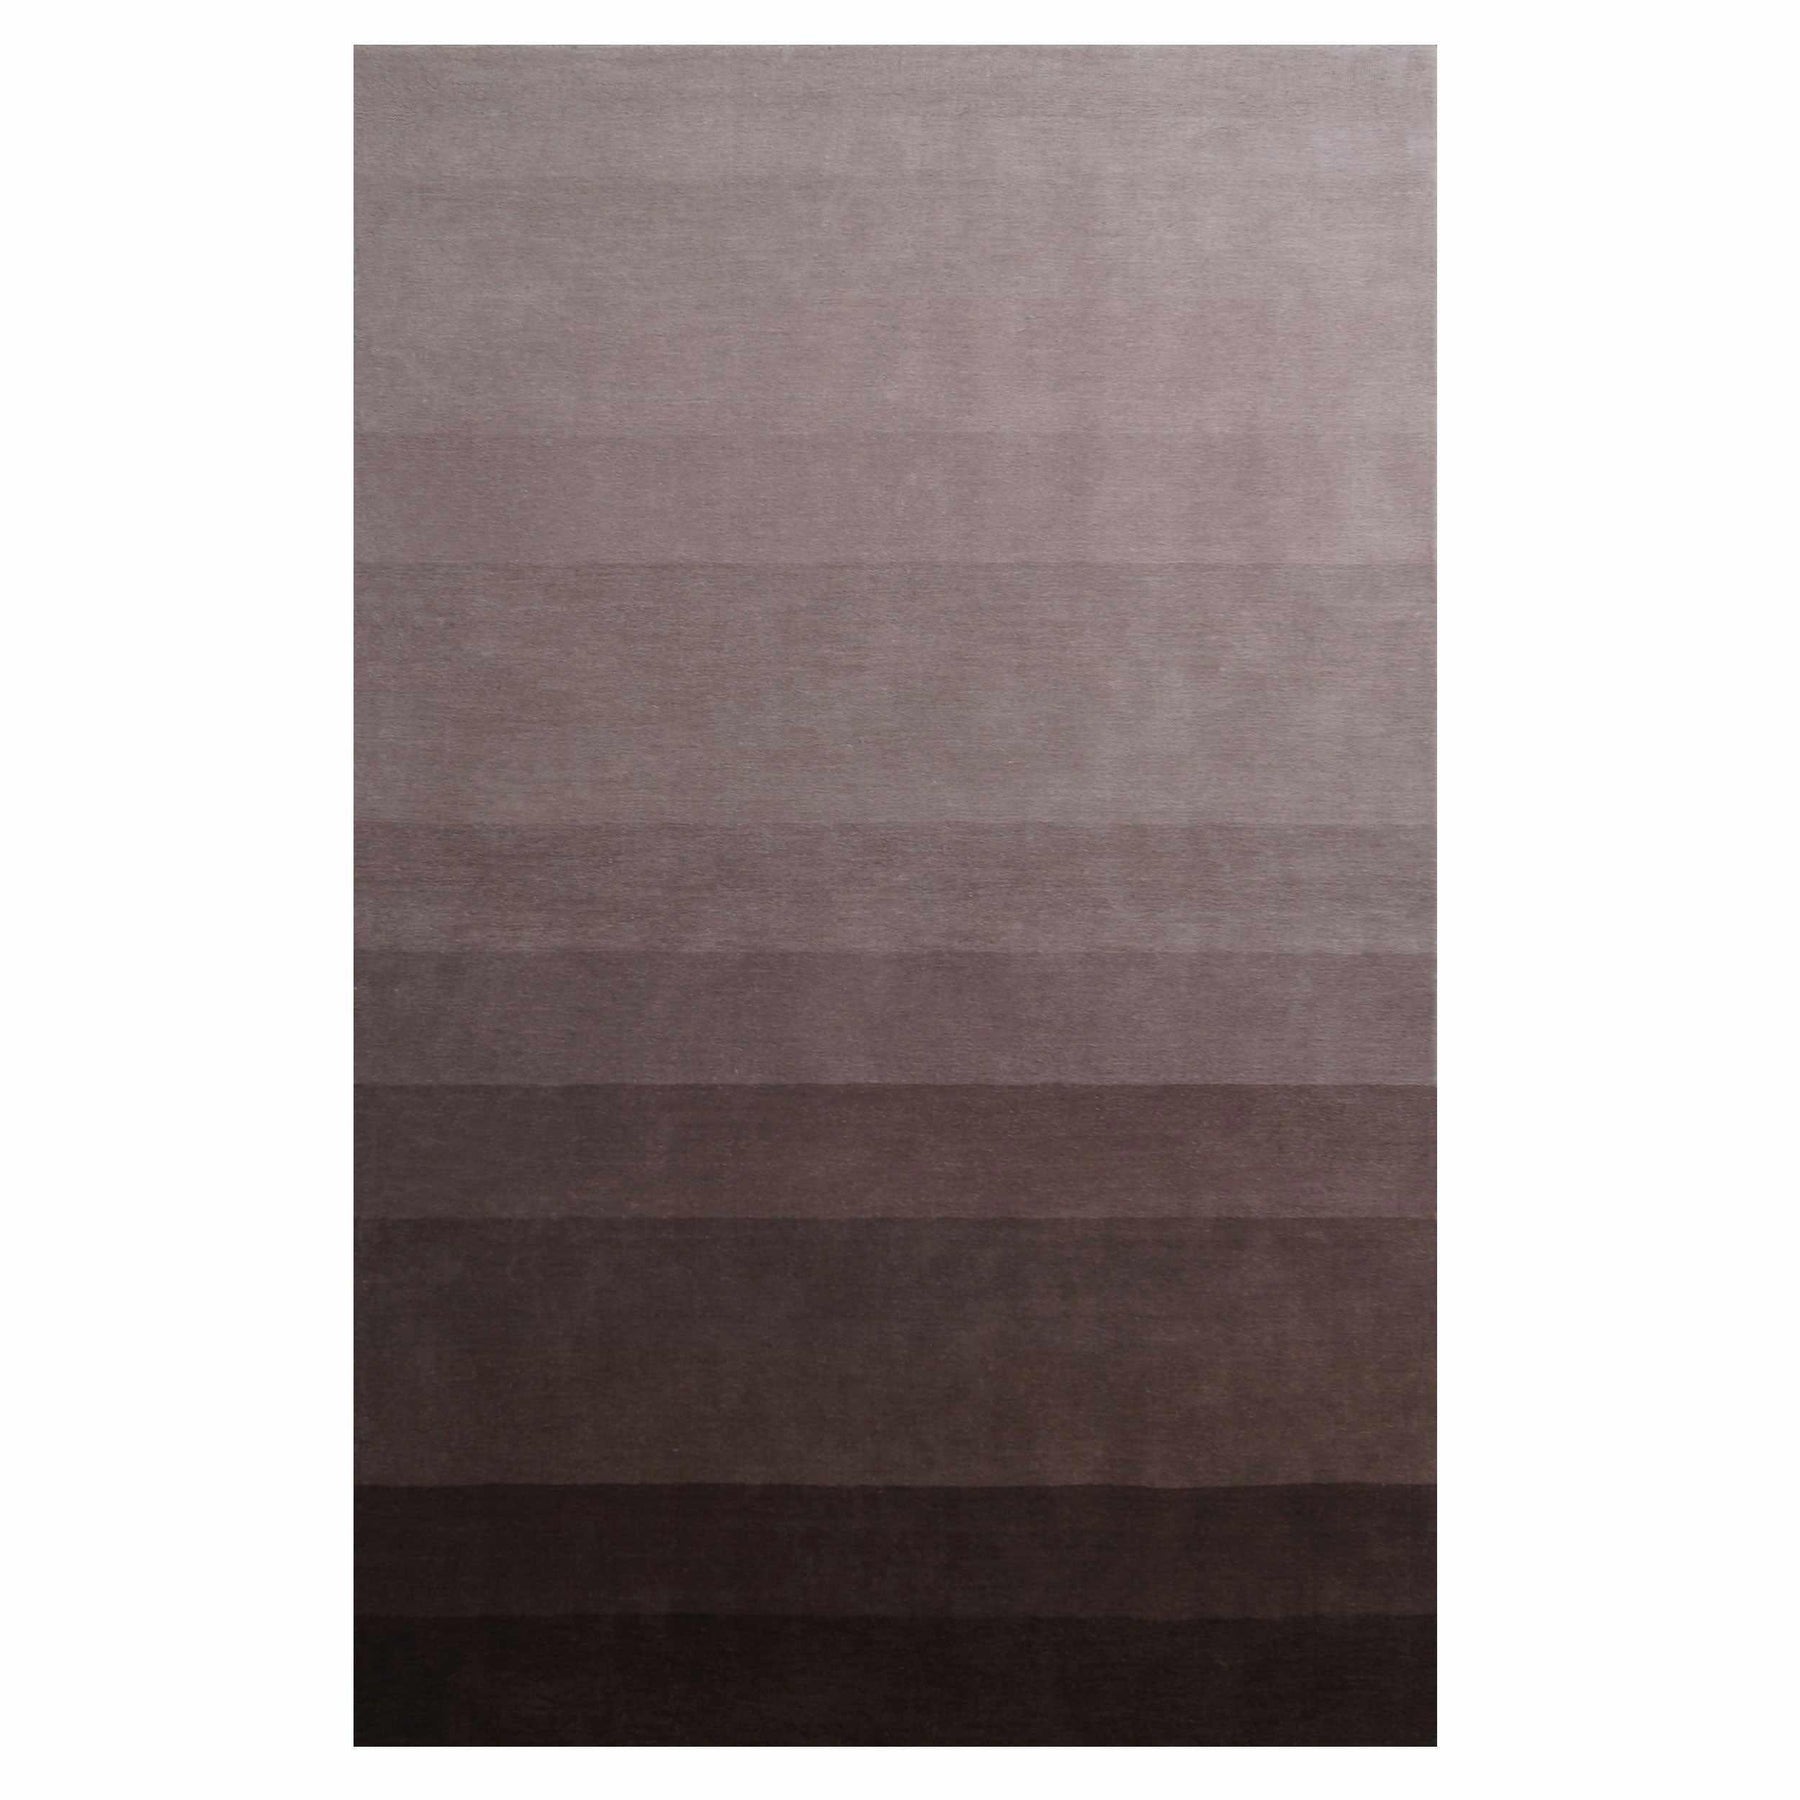  Superior Handwoven Ombre Stripes Wool Area Rug - Brown